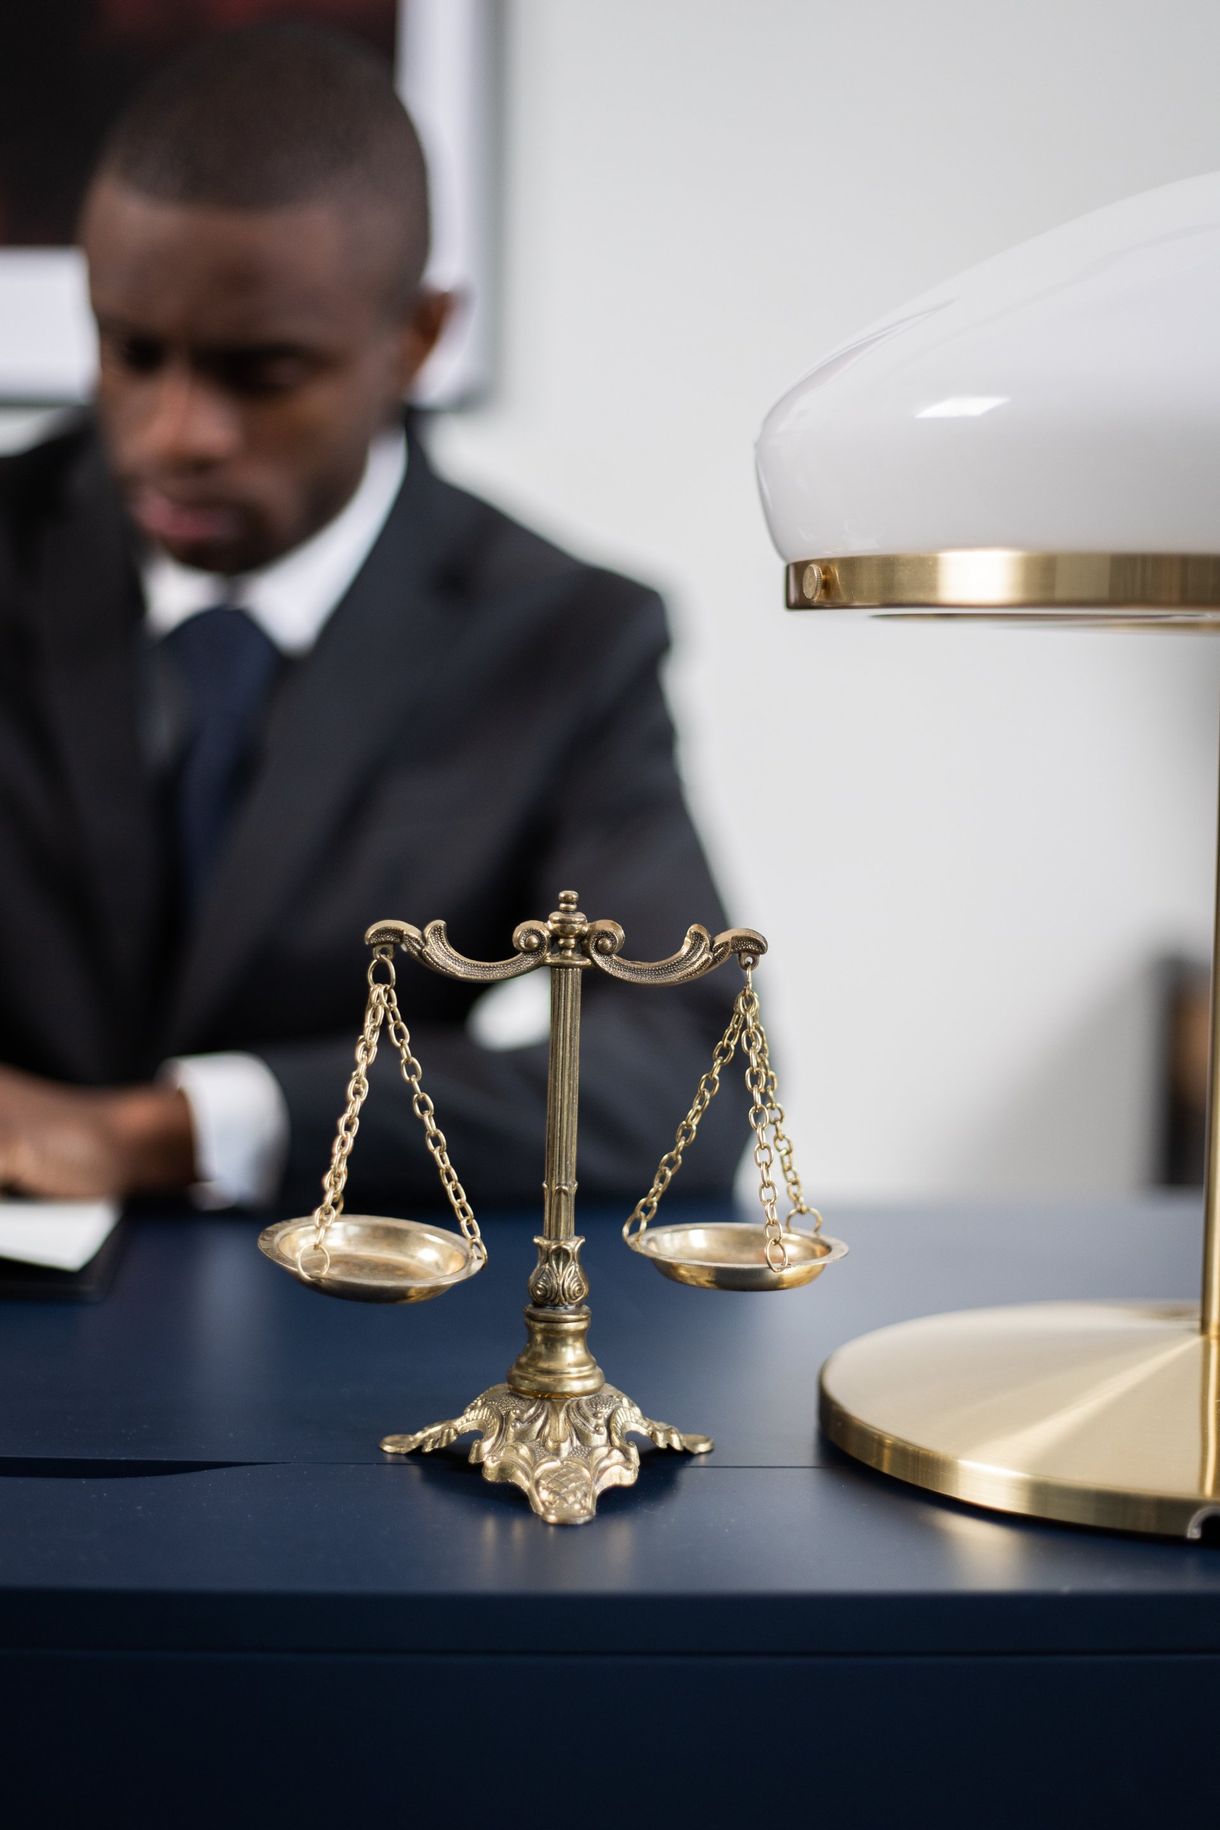 A man is sitting at a desk with a scale of justice on it.